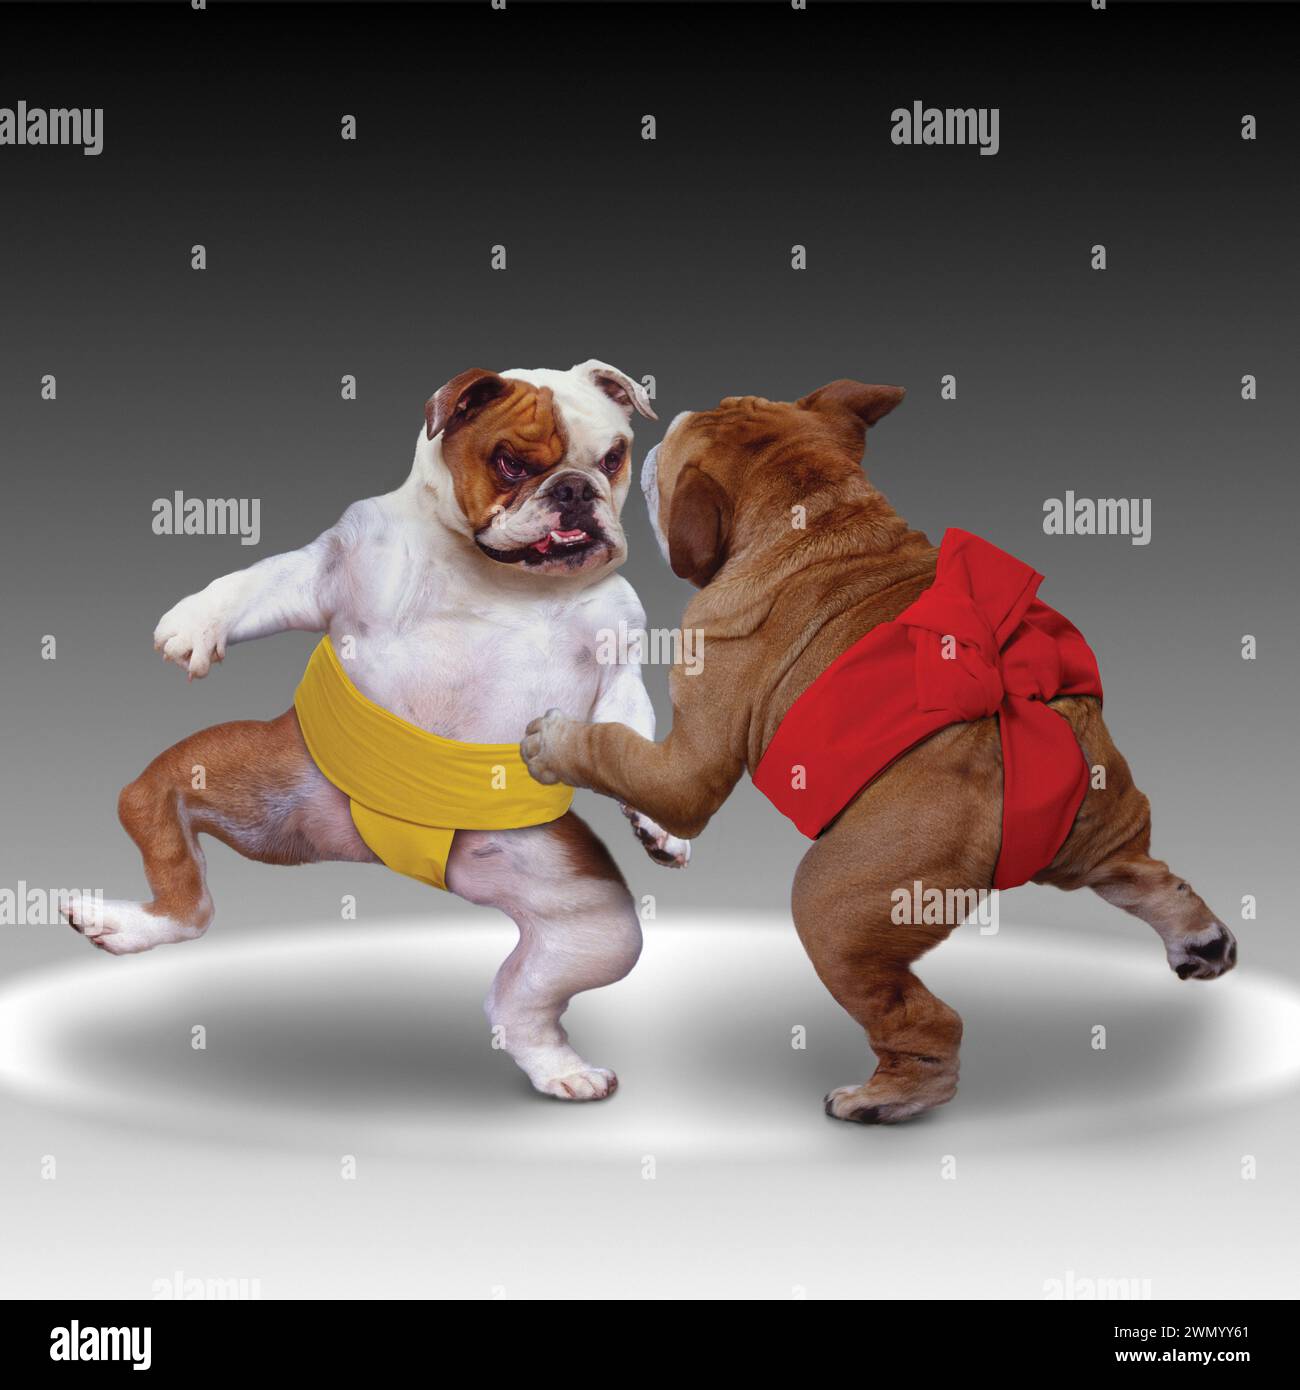 Two bulldog sumo wrestlers square off in a funny animal photo about conflict and social issues. Stock Photo